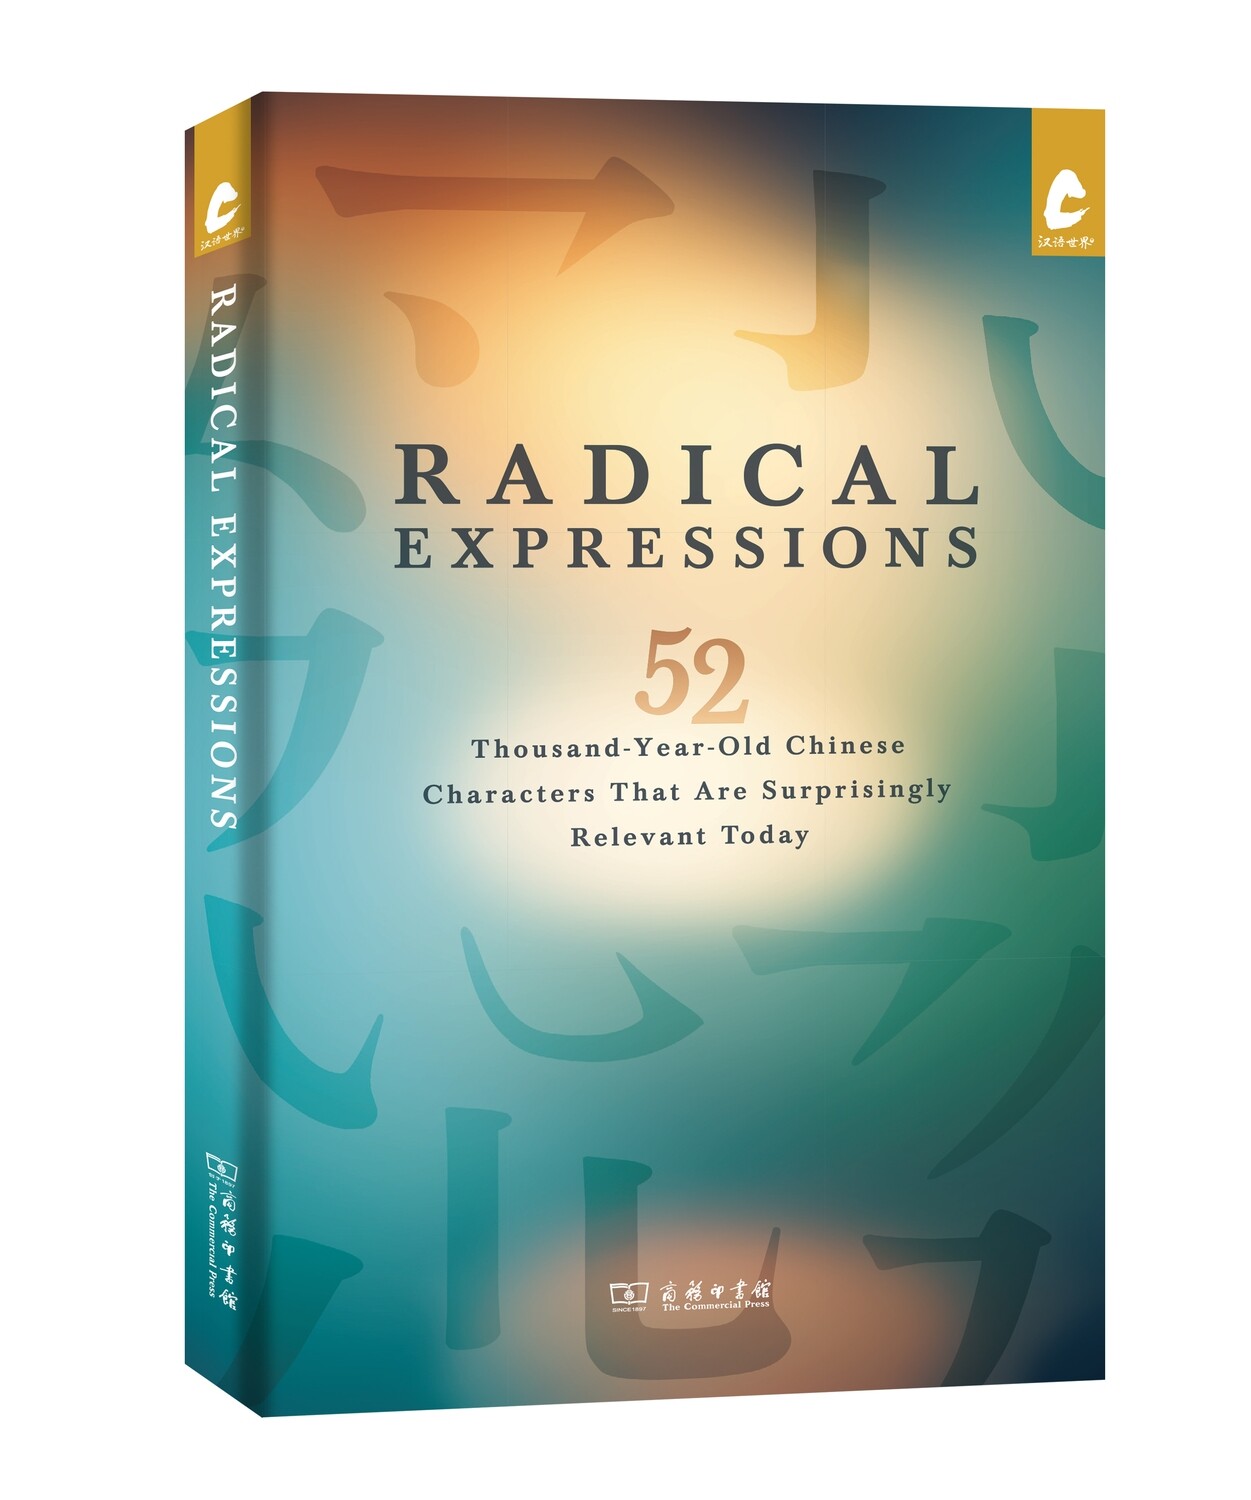 Radical Expressions: 52 Thousand-Year-Old Chinese Characters That Are Surprisingly Relevant Today